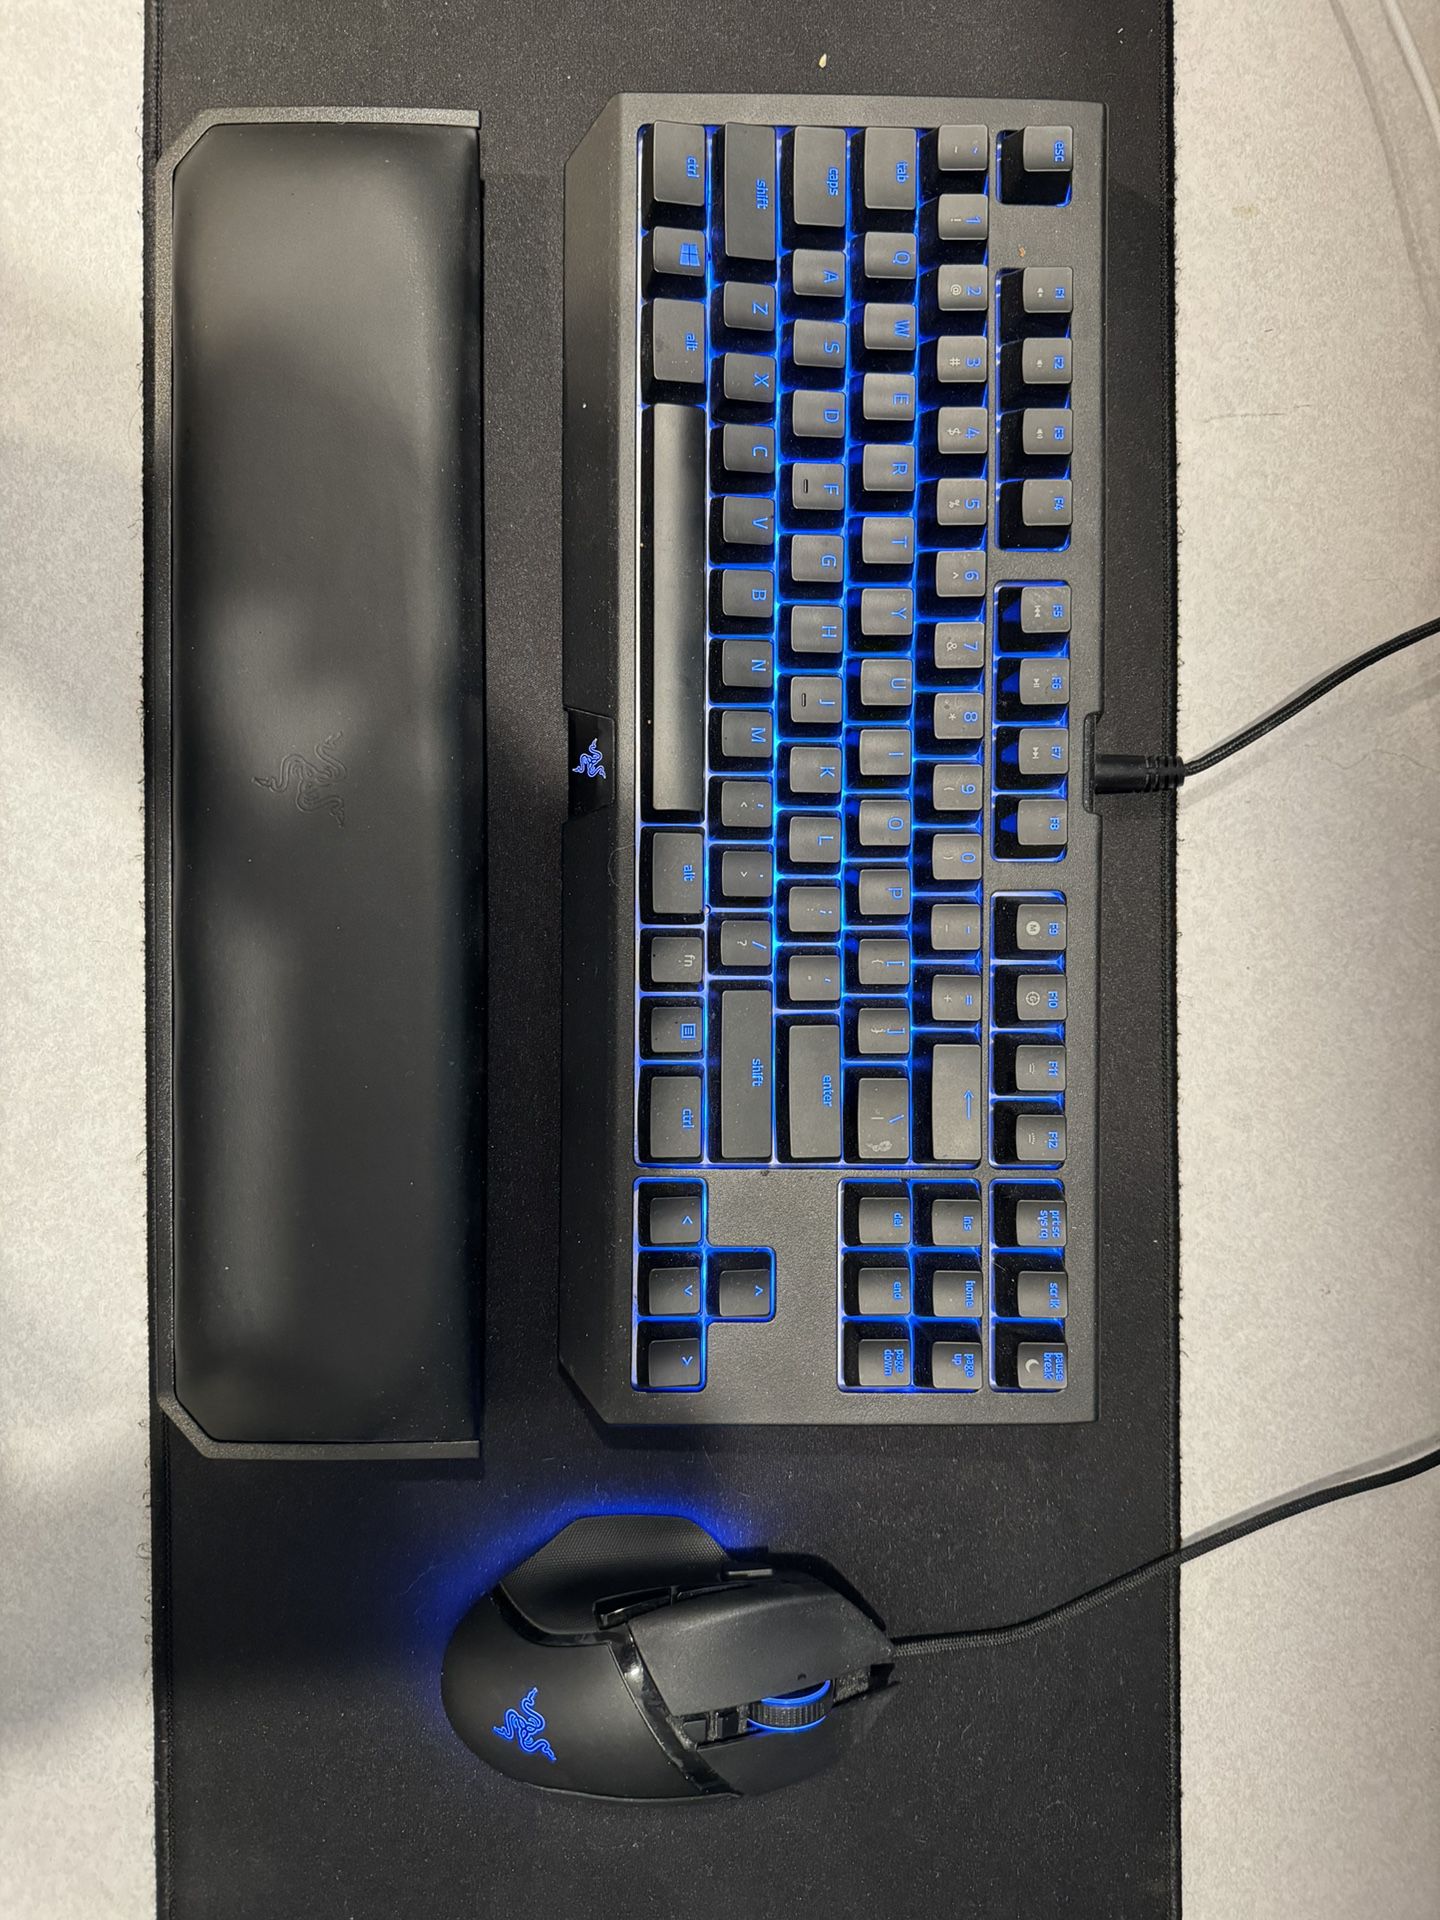 Razer Keyboard And Mouse 